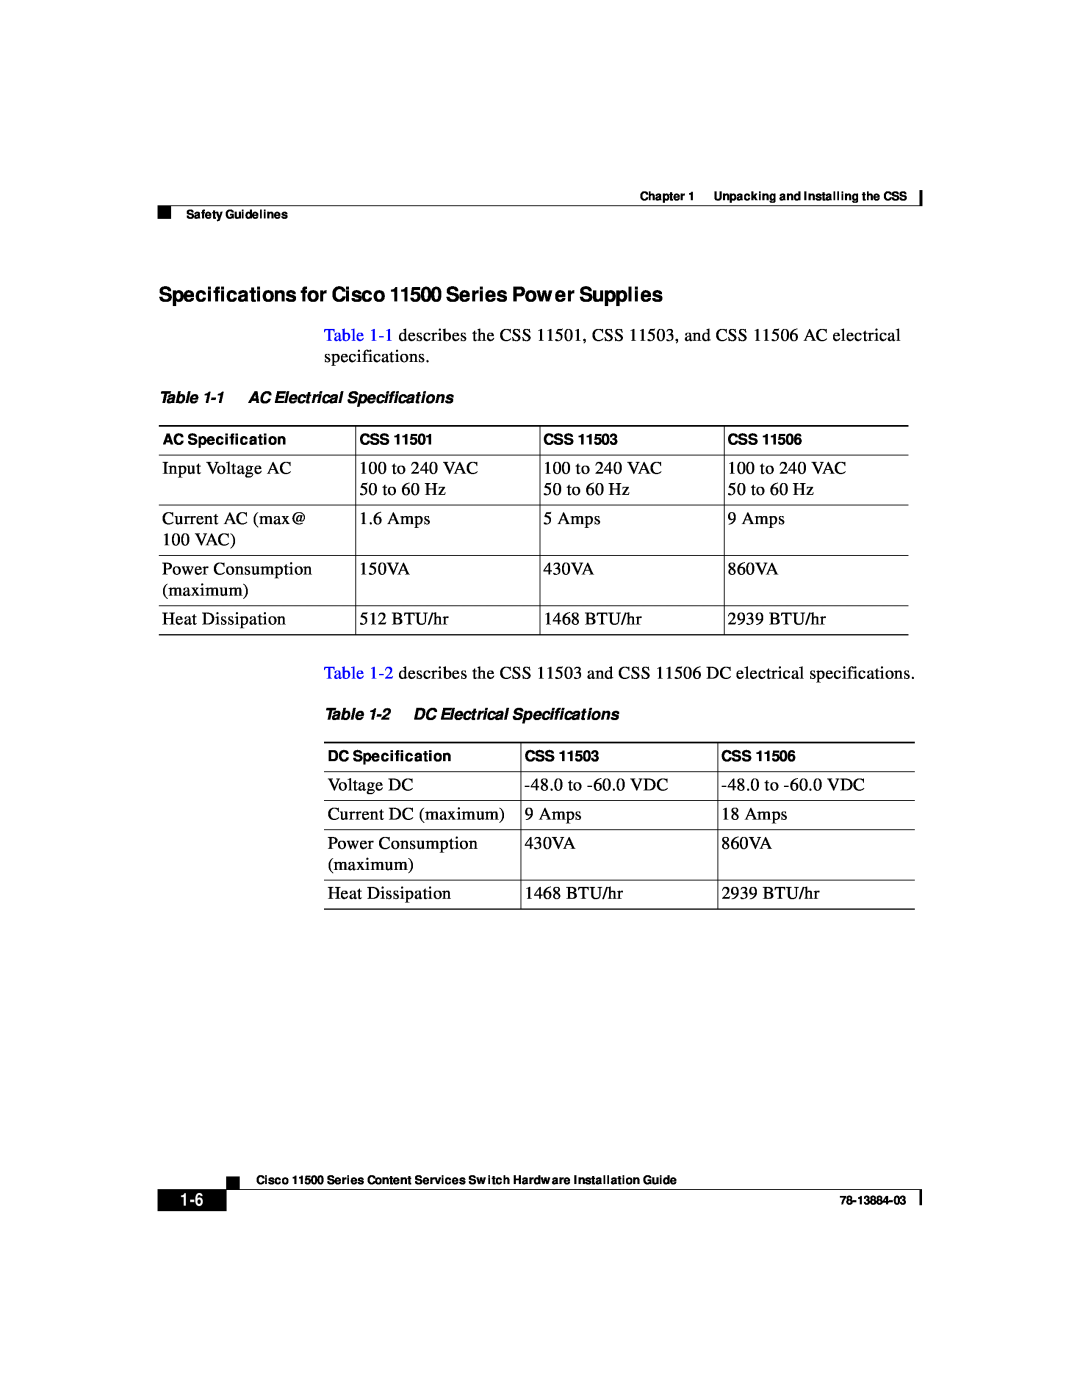 Cisco Systems manual Specifications for Cisco 11500 Series Power Supplies, 1 AC Electrical Specifications 